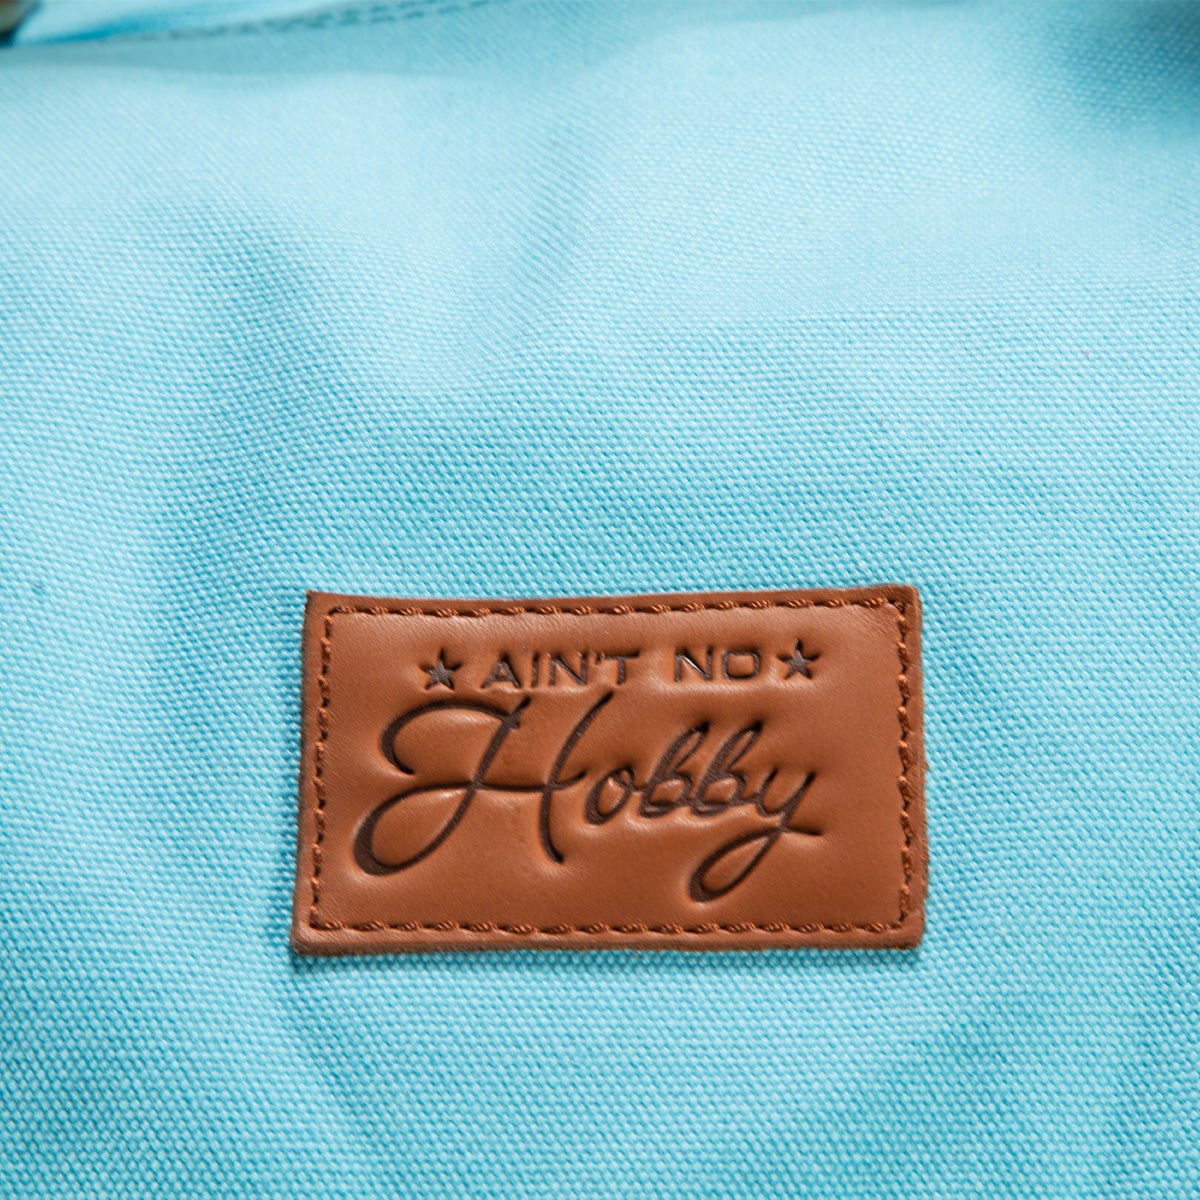 Ain't No Hobby Duffel Bag-Accessories-Fore Play-Light Blue-One Size-Barstool Sports